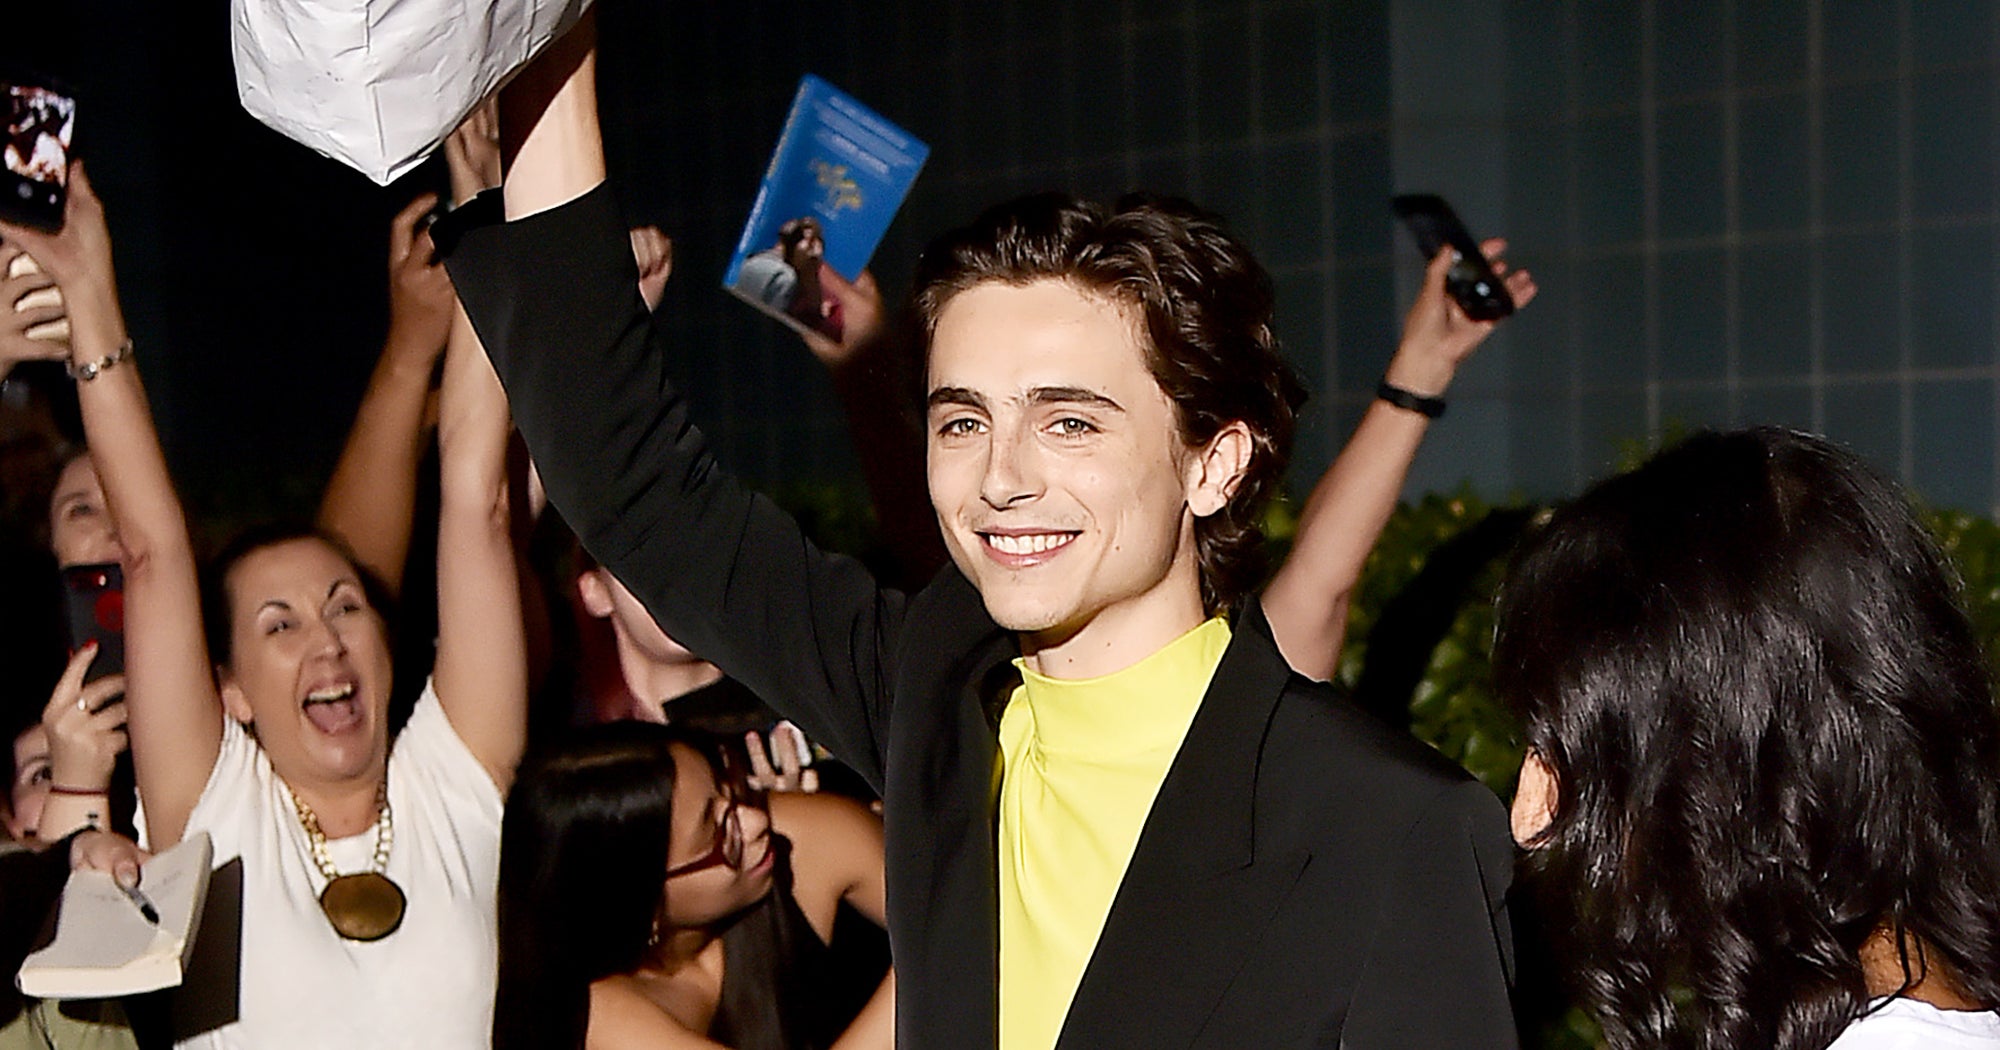 Timothee Chalamet Gave Out Bagels At The King Premiere